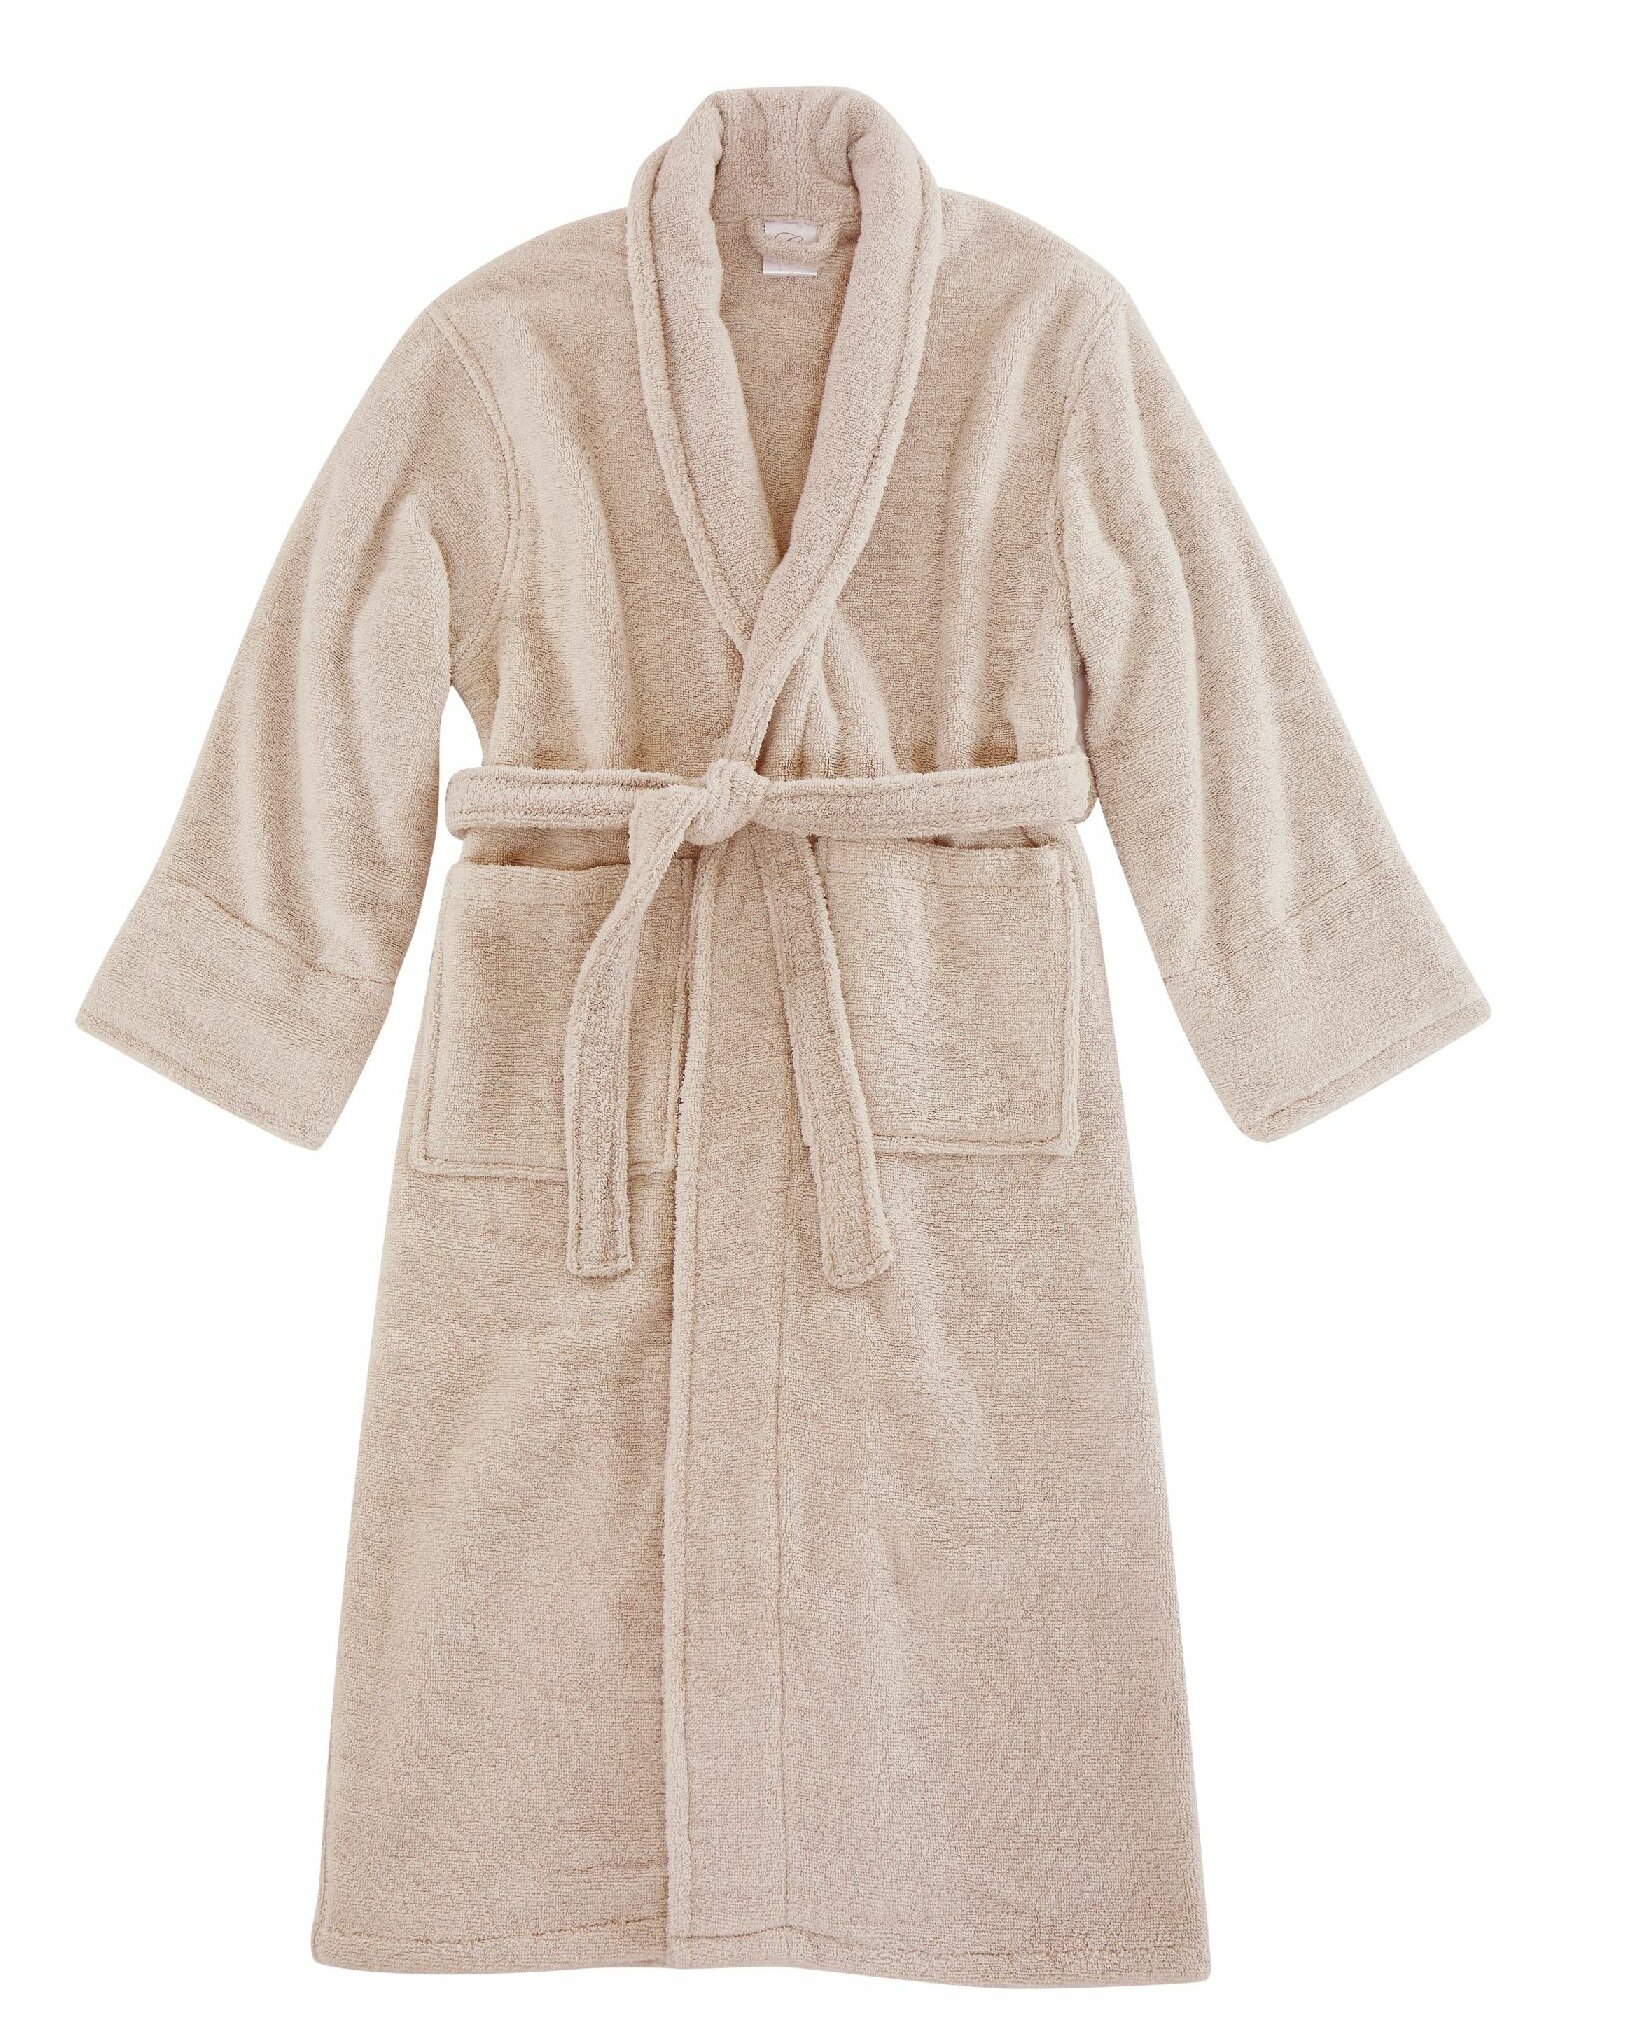 Essential Terry Cloth Spa Robe | Luxury Spa Robes | Luxury Spa Robes